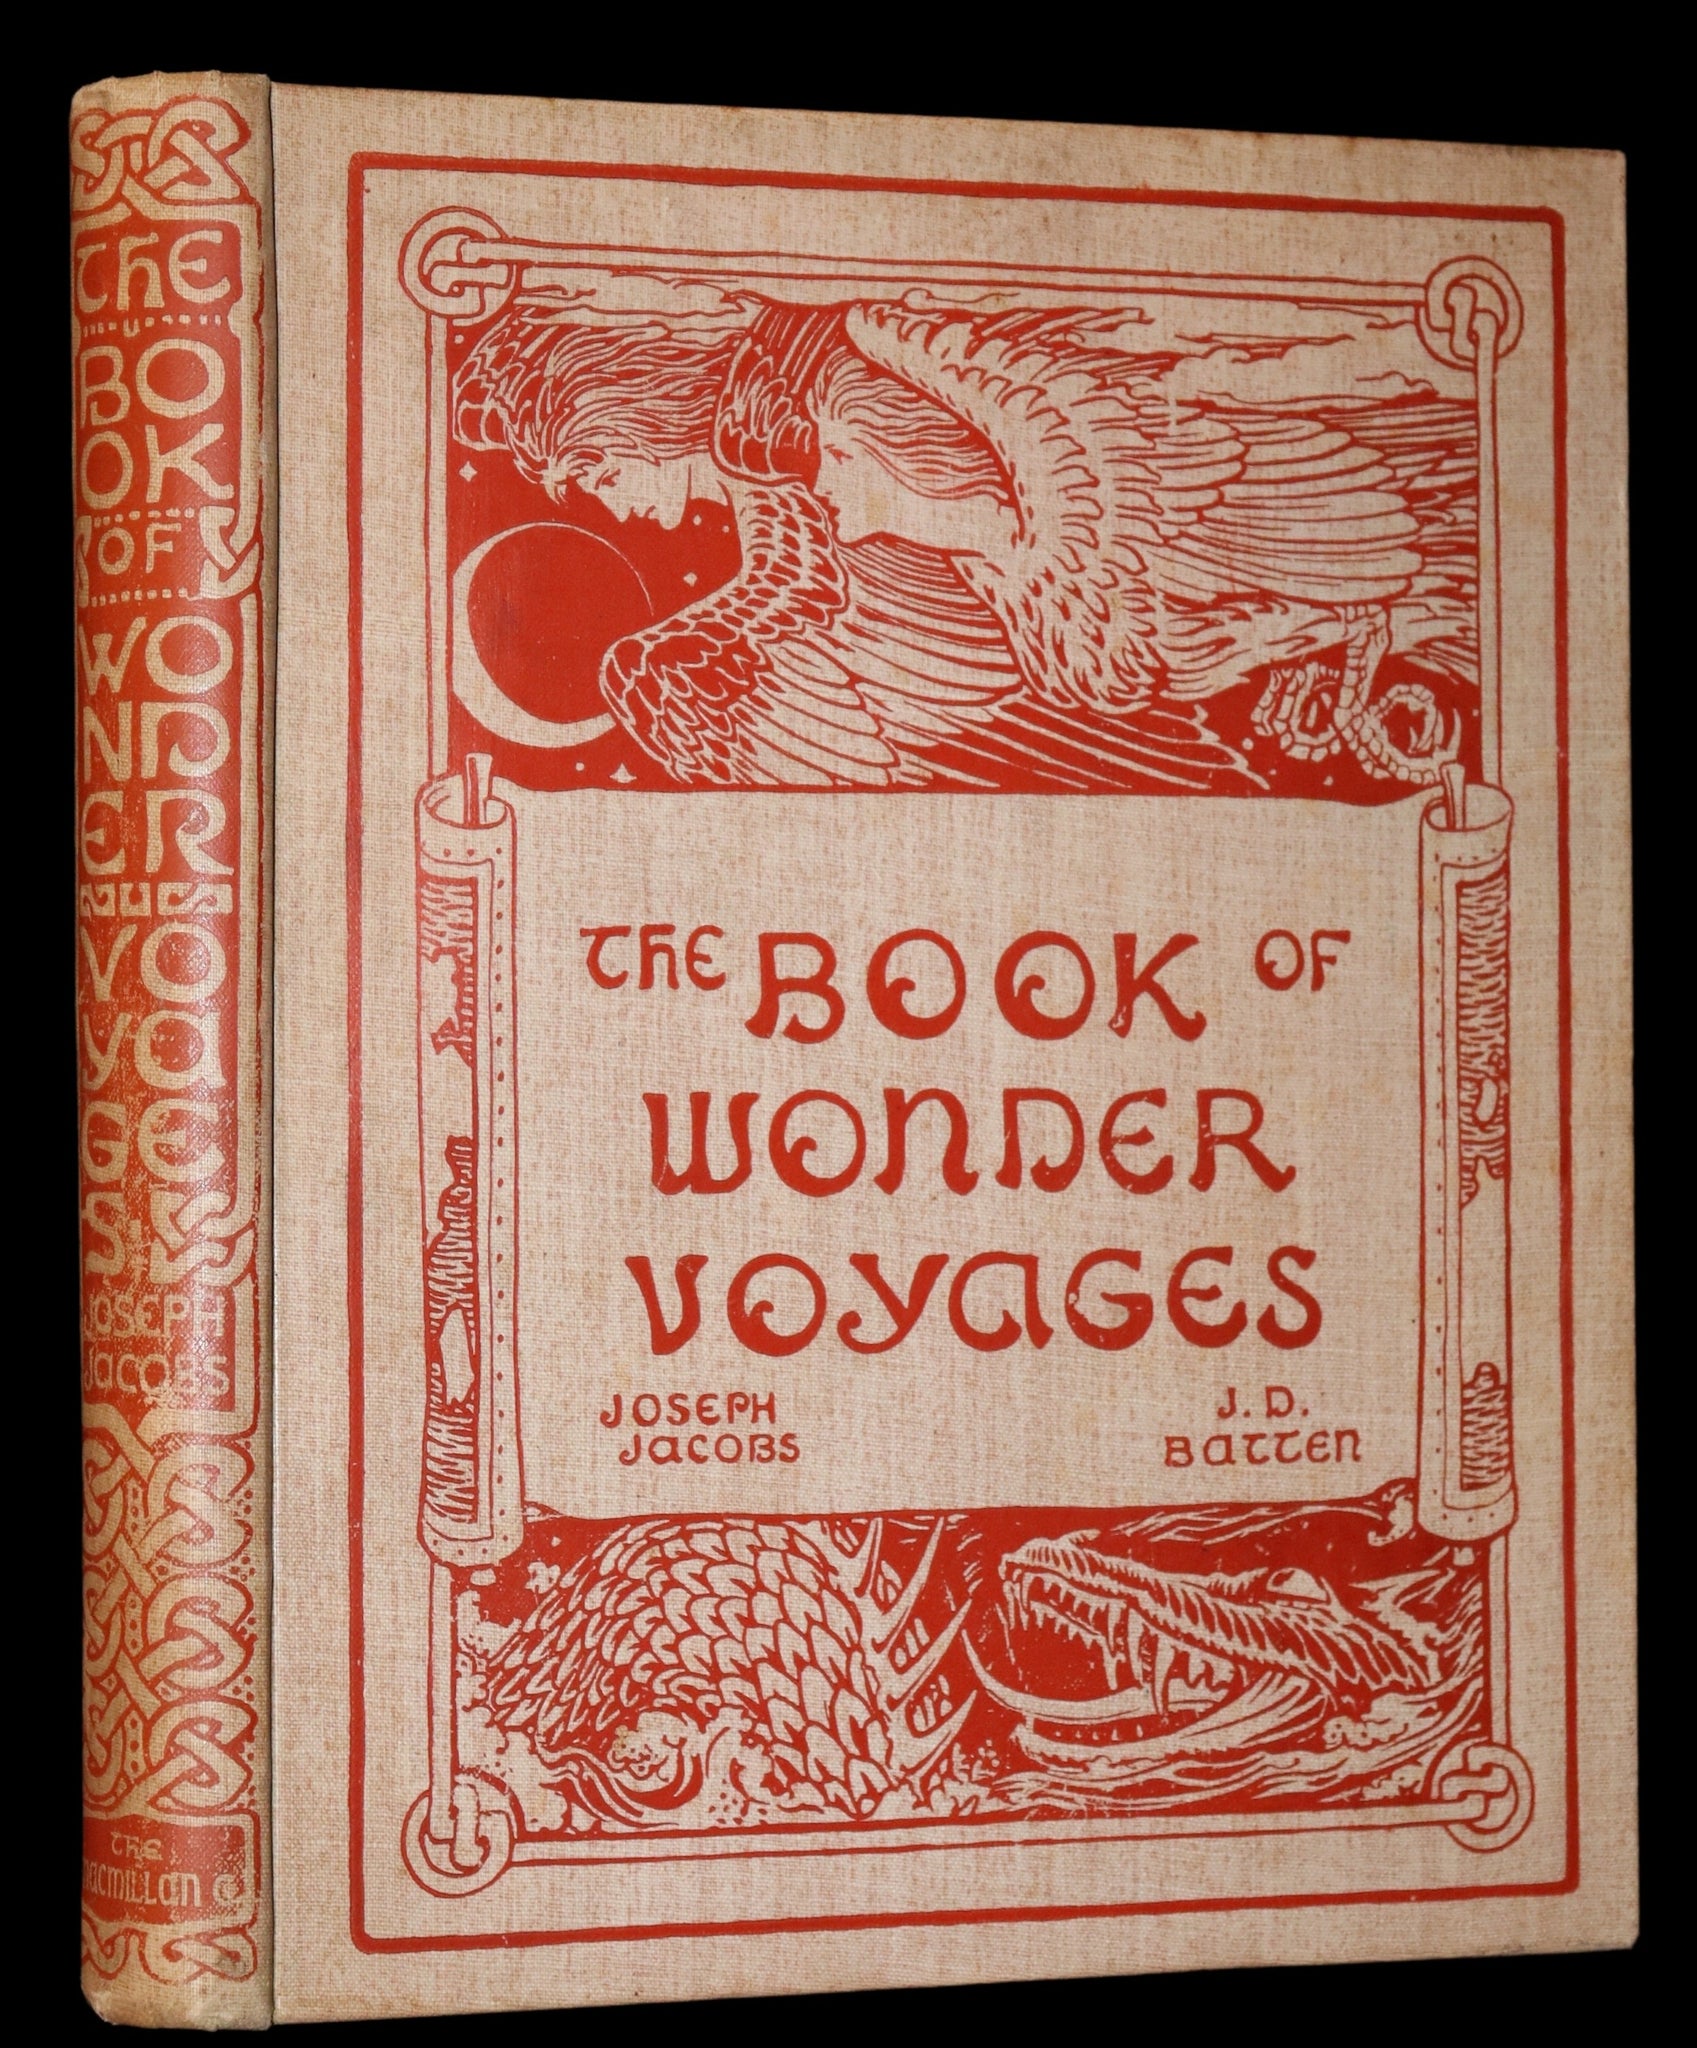 1896 Rare First Edition - The BOOK of WONDER VOYAGES by Joseph Jacobs Illustrated by J.D. Batten.